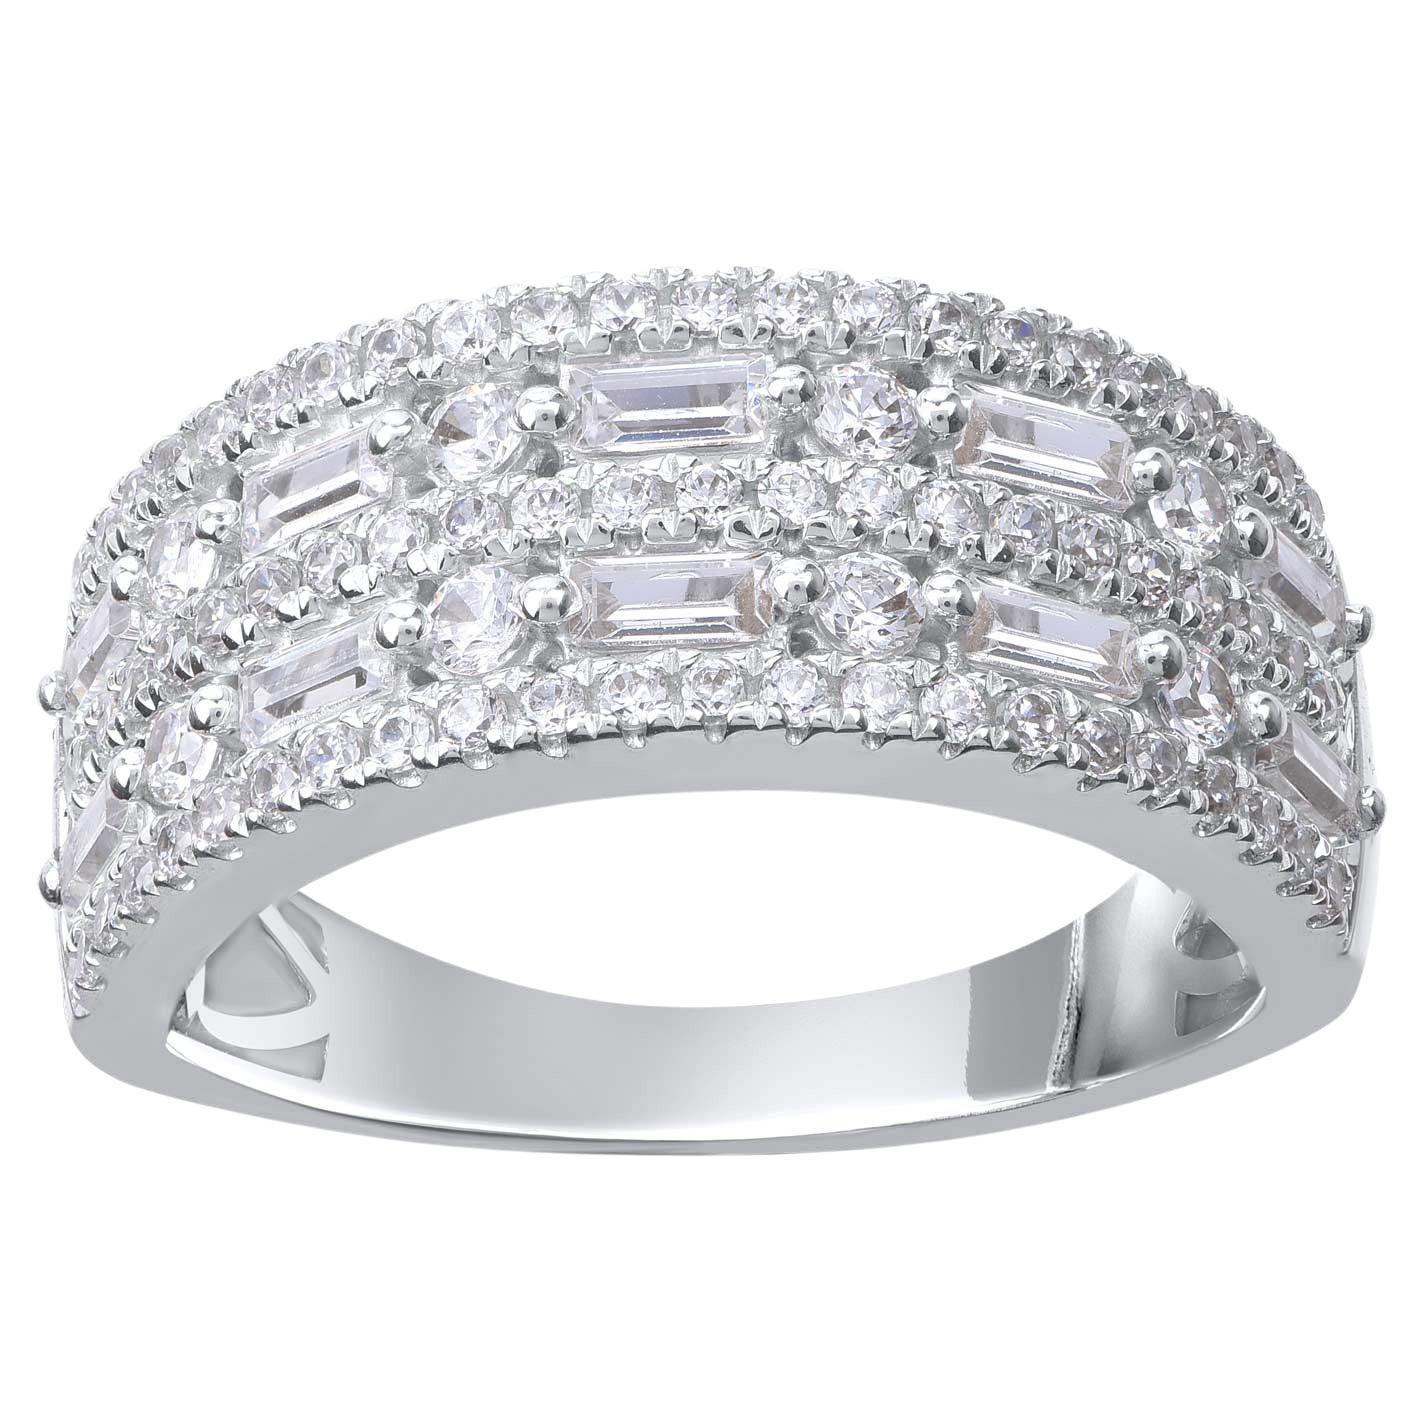 TJD 1.0 Carat Round & Baguette Diamond 14KT White Gold Two Row Wedding Band Ring